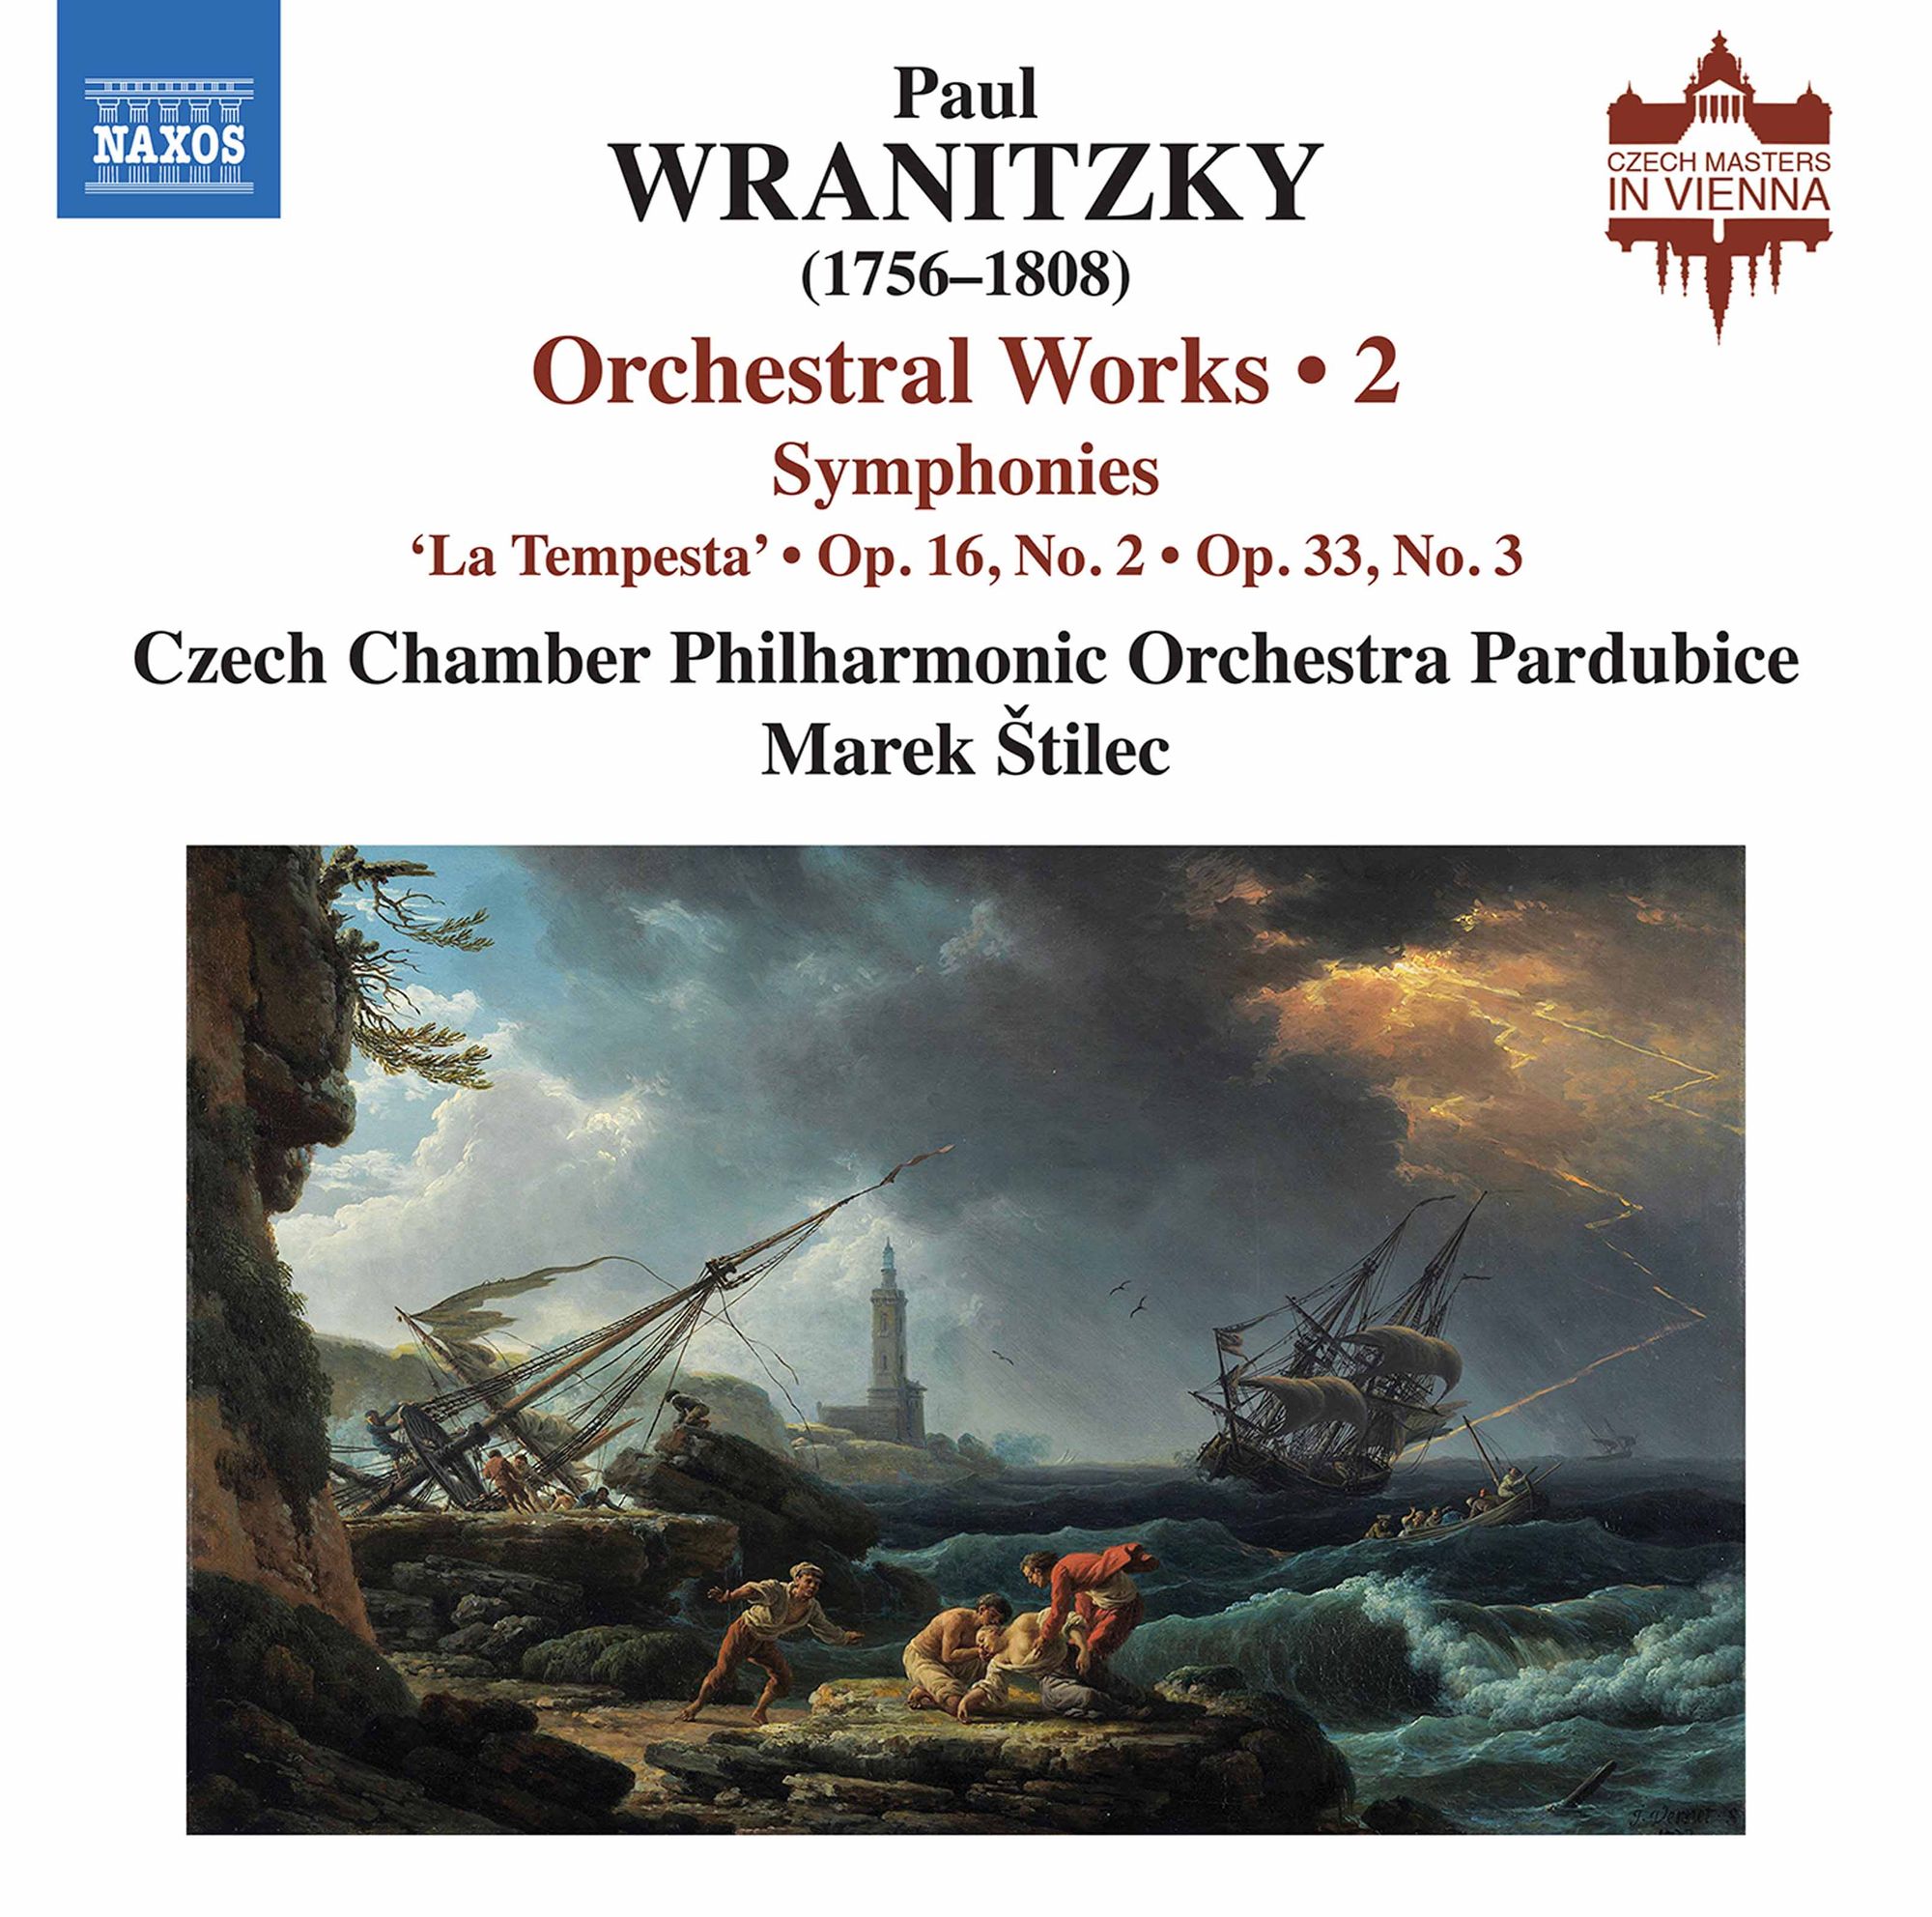 Paul Wranitzky Orchestral Works #2